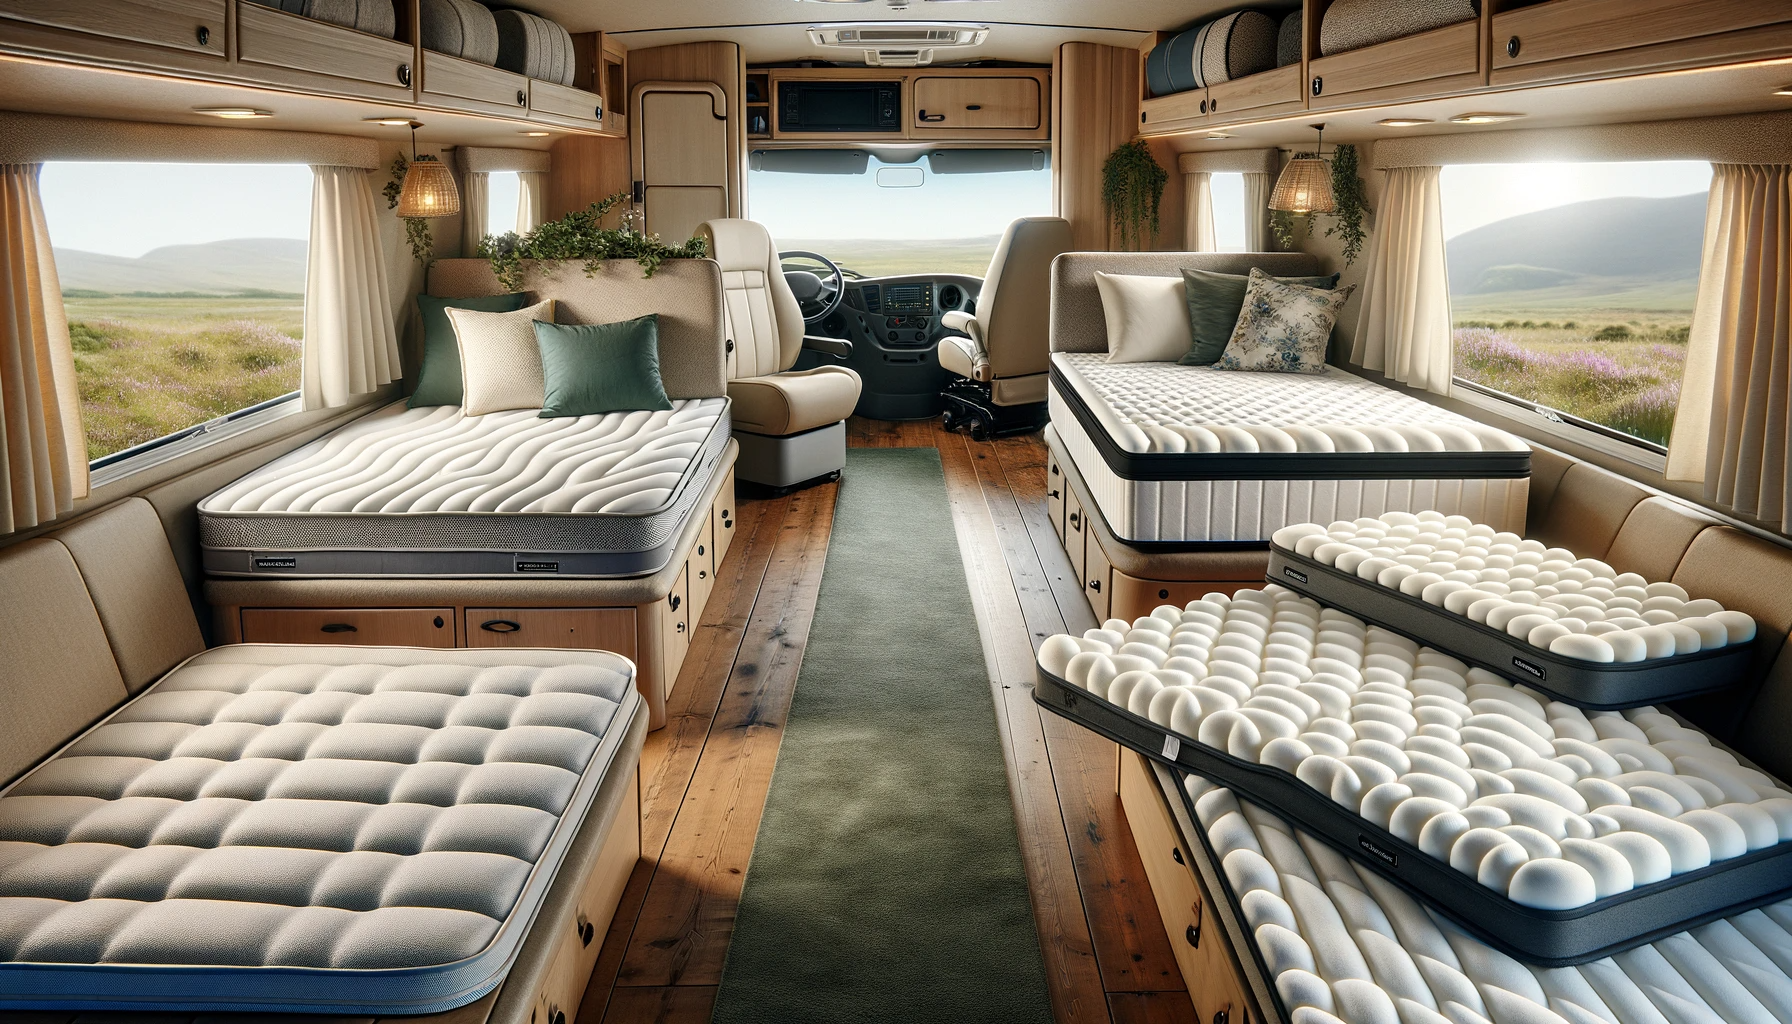 a variety of mattress toppers designed specifically for caravans, campervans, and motorhomes.